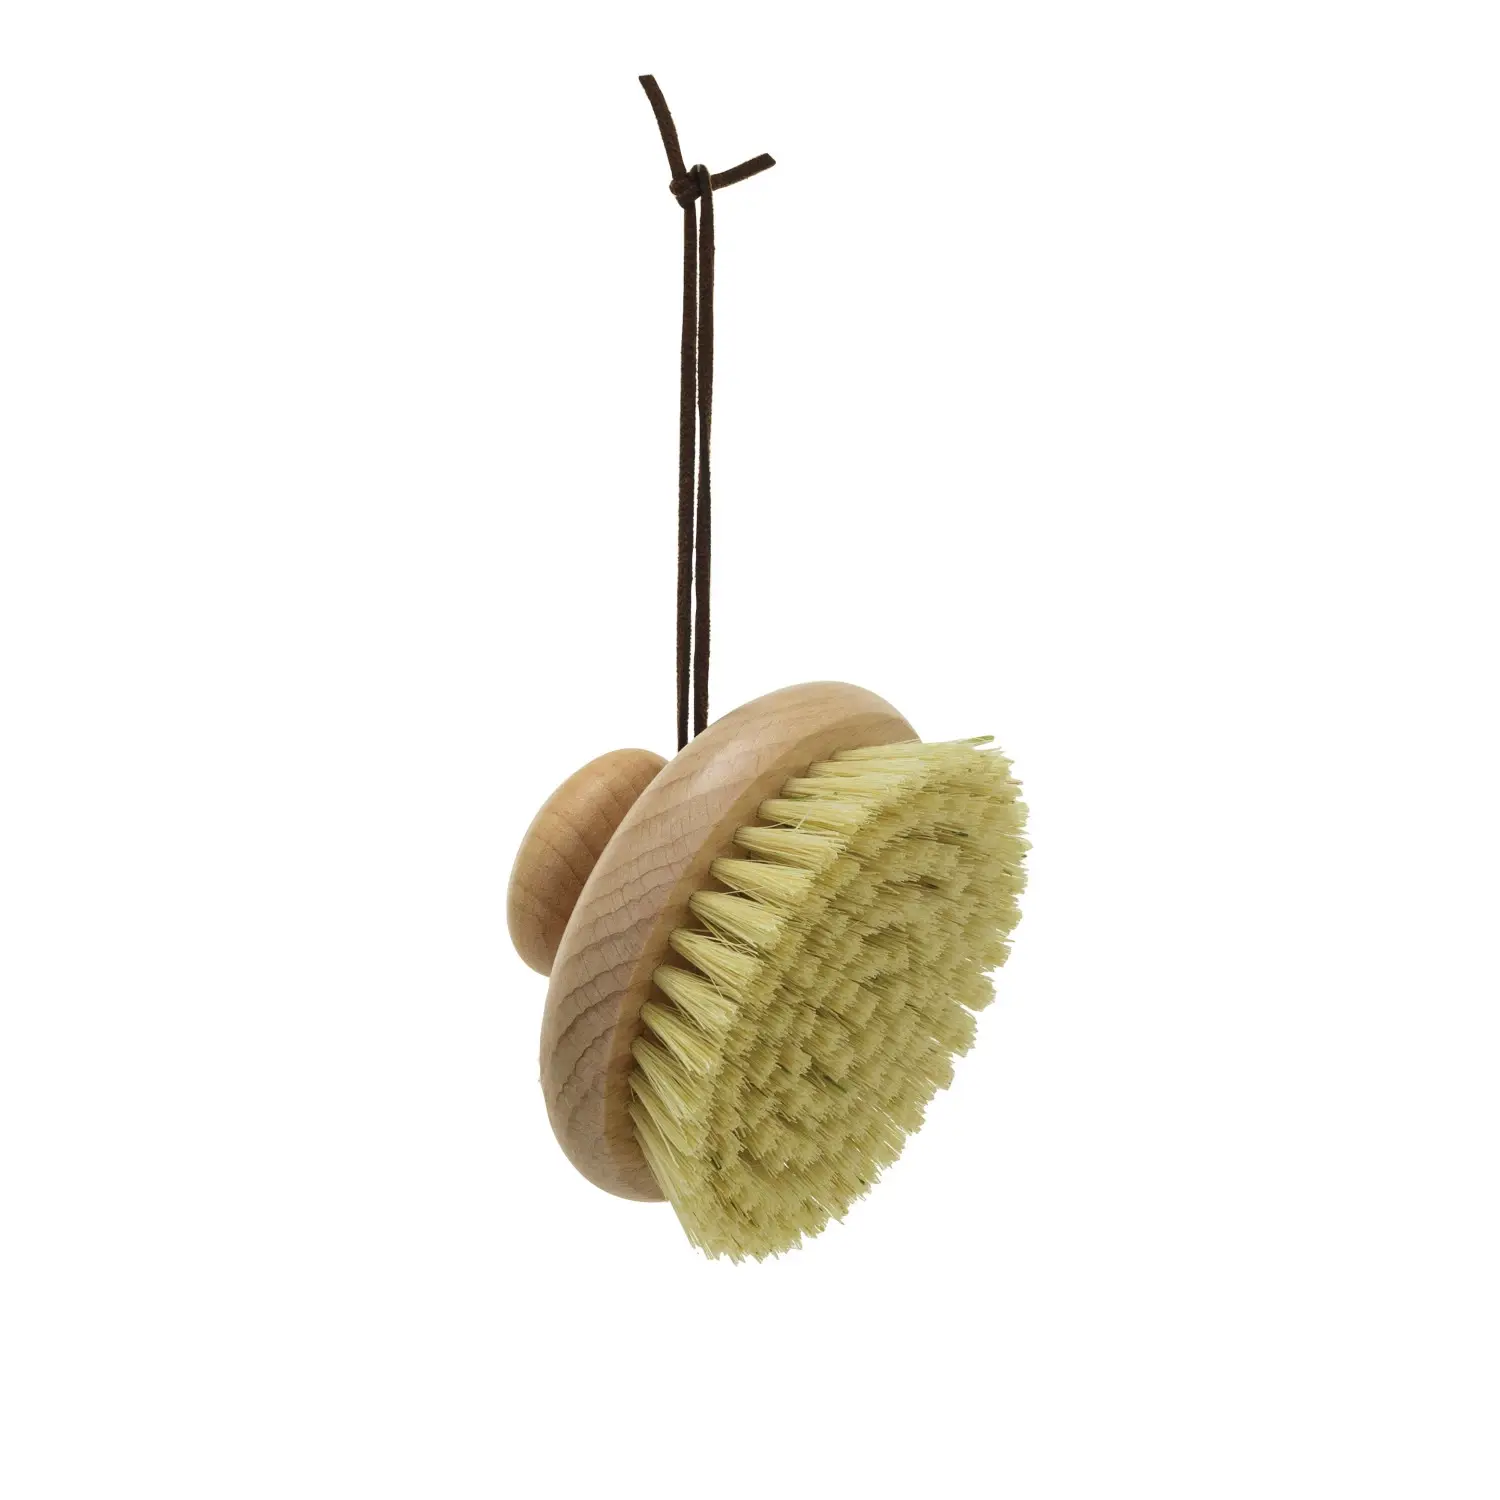 Beech Wood Body Brush with Round Handle and Leather Tie